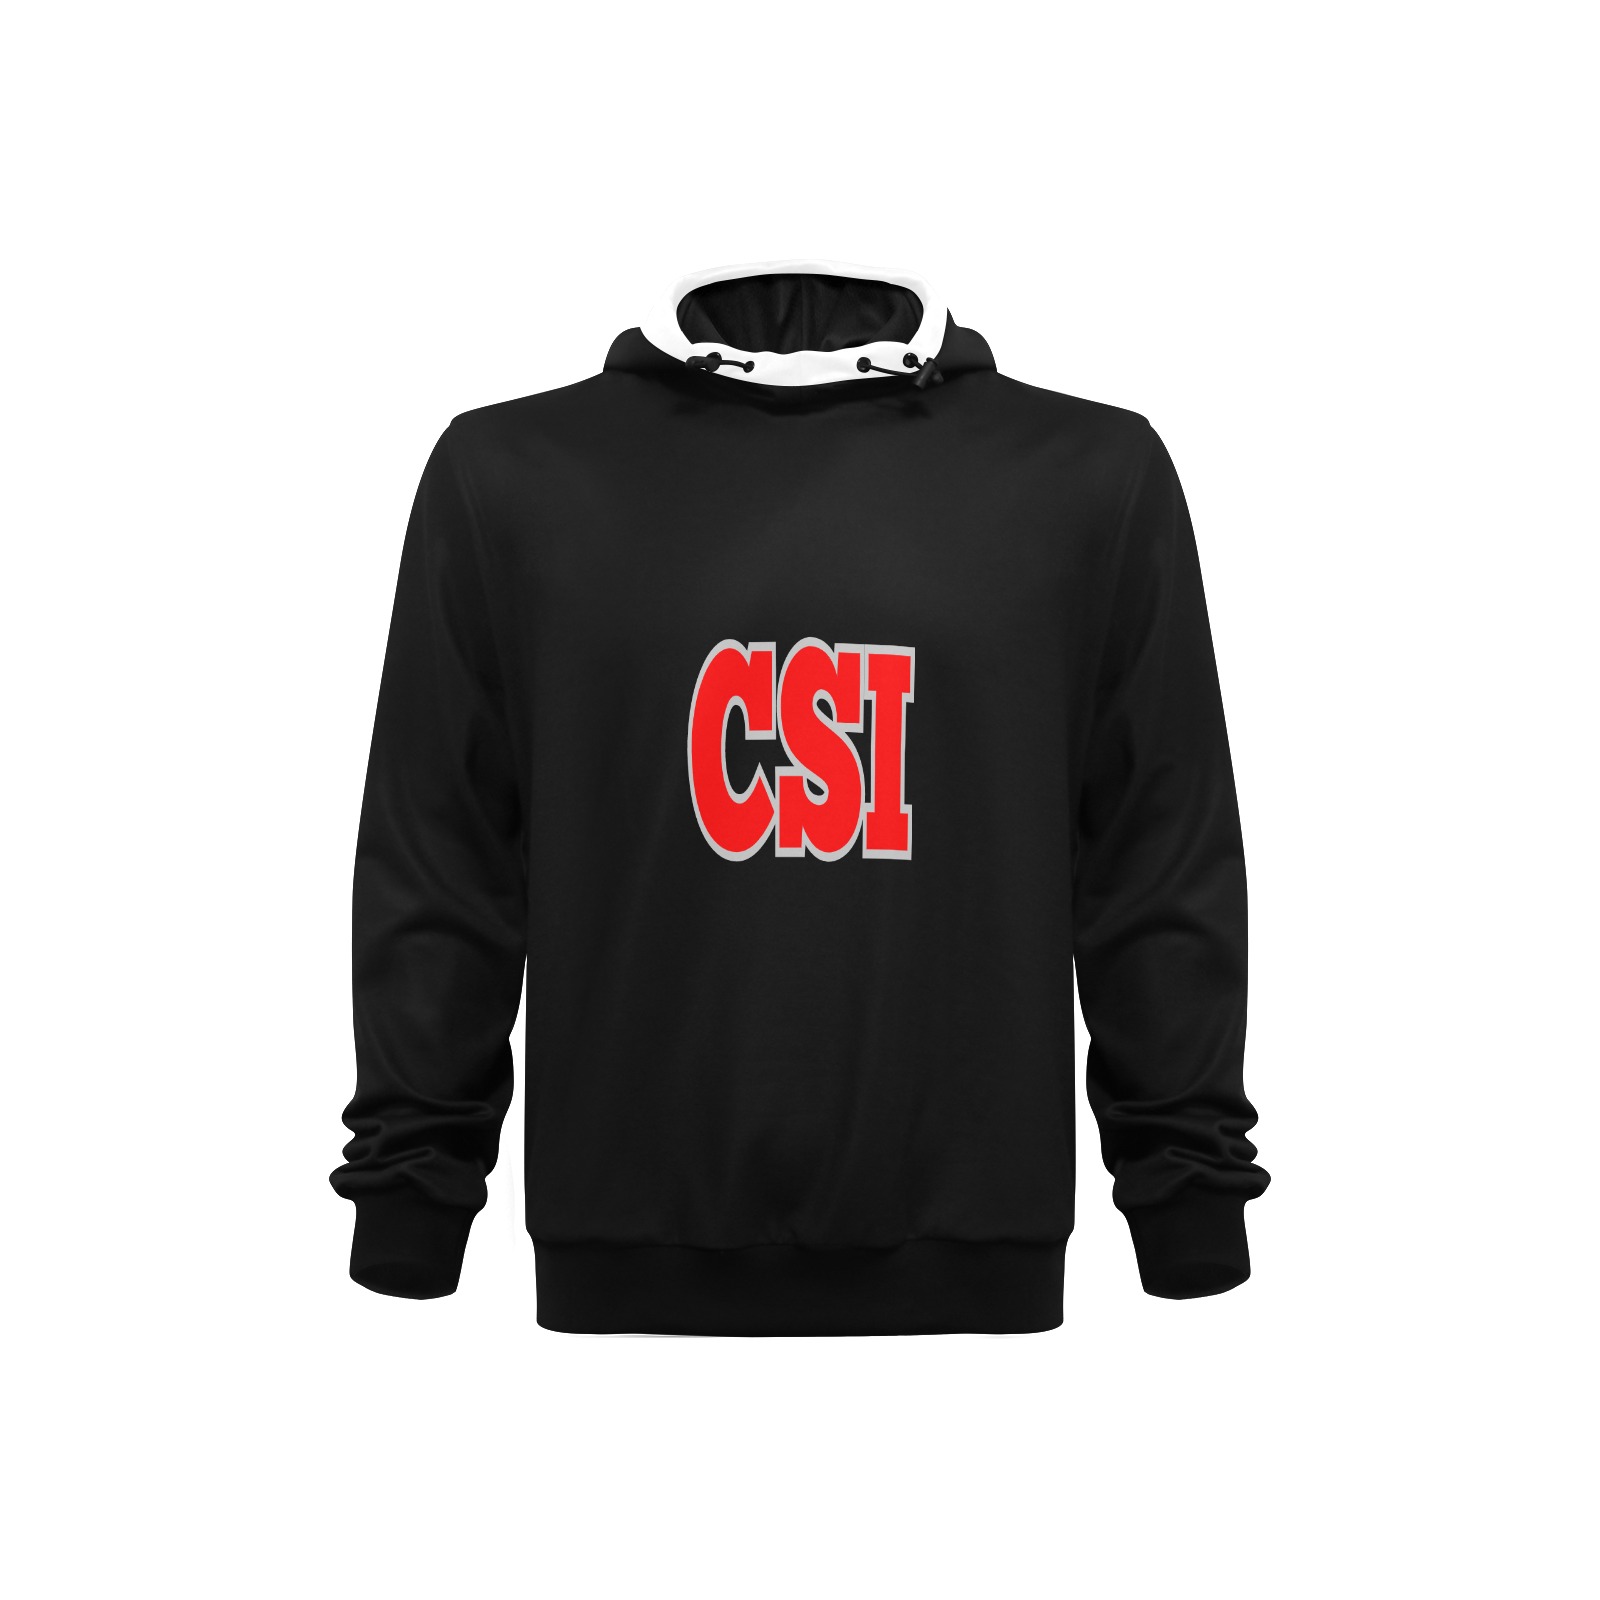 bb c43x3 High Neck Pullover Hoodie for Men (Model H24)